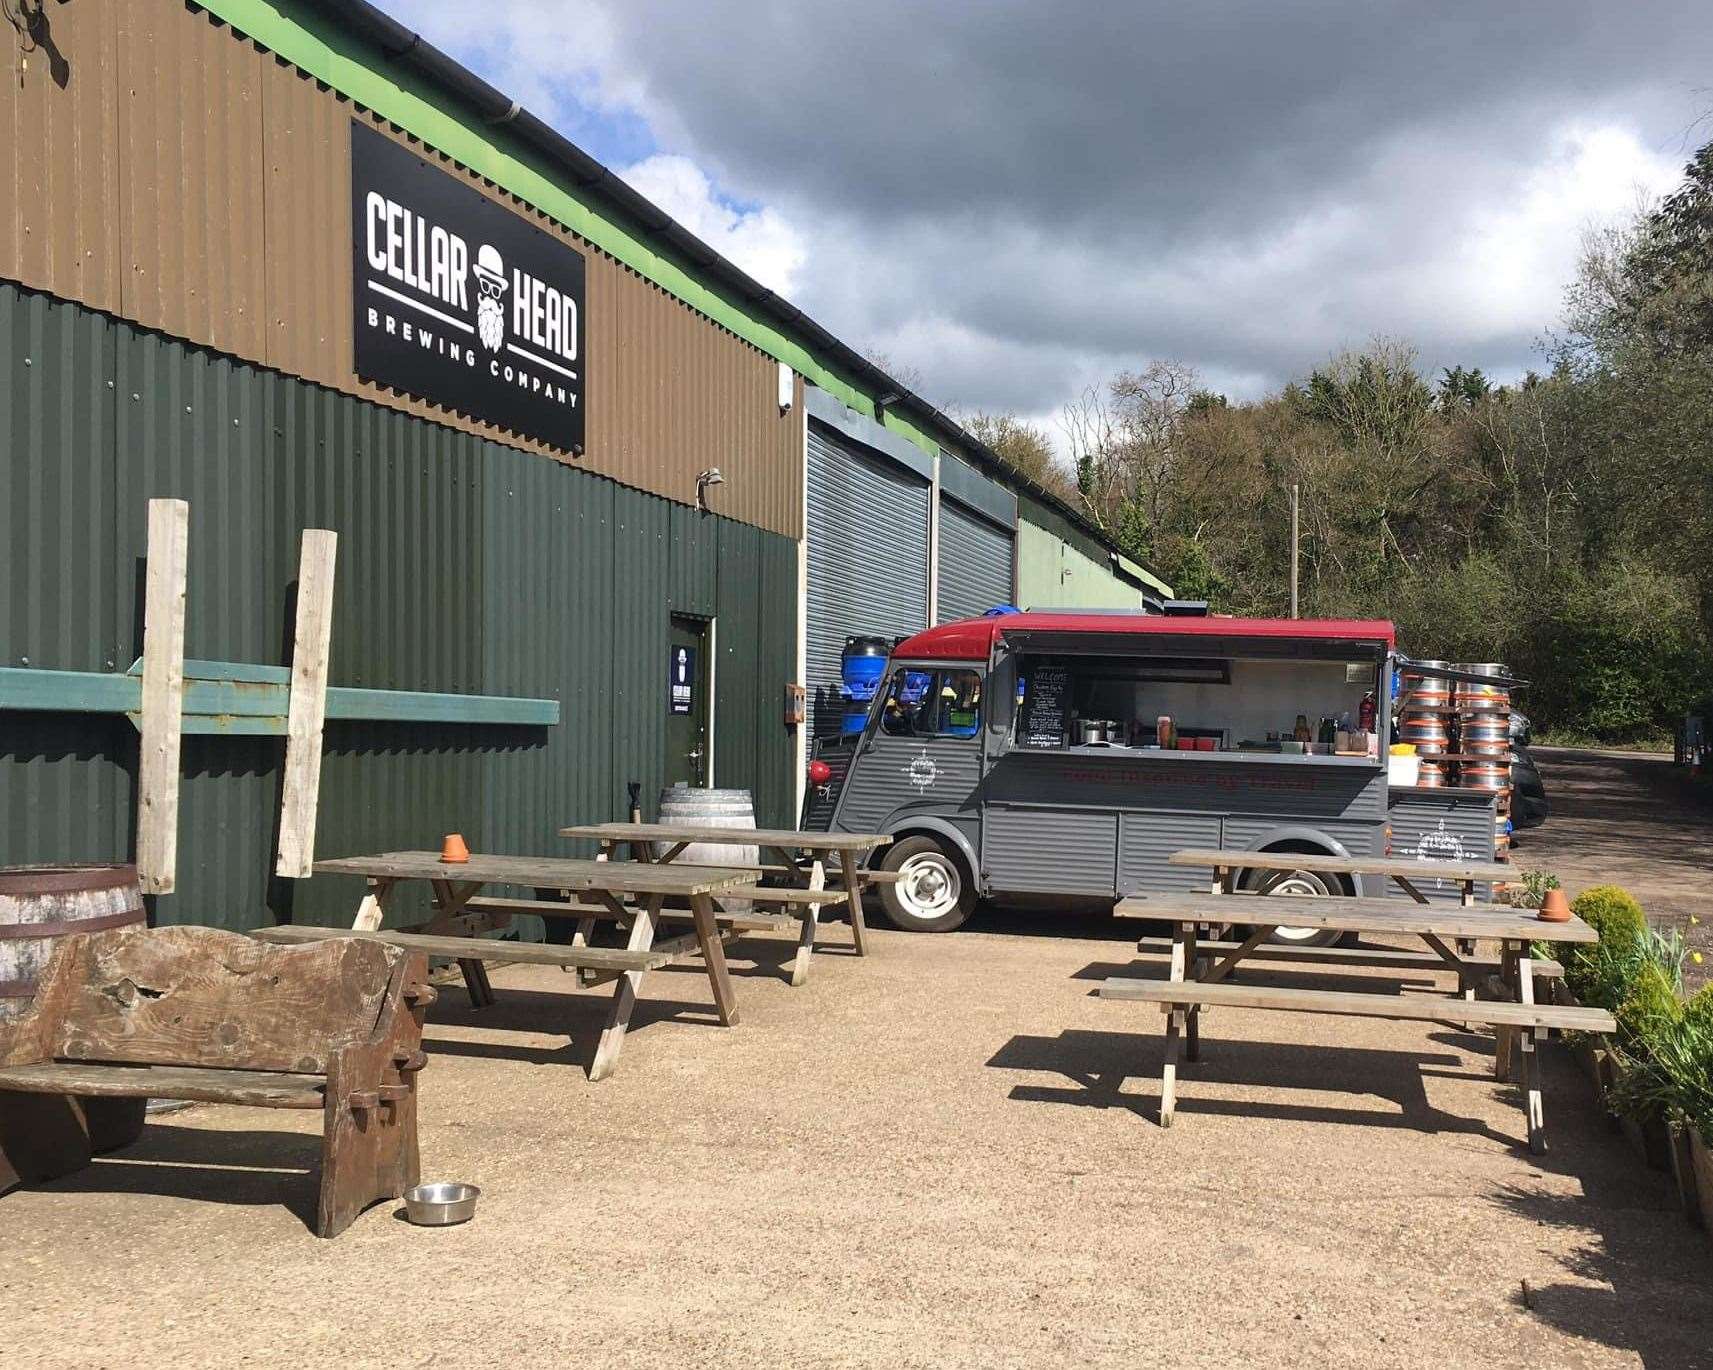 Cellar Head Brewing Company & Tap Room of Pillory Corner, Goudhurst, has gone into administration seven years after it opened. Photo: Wanderlust Street Food